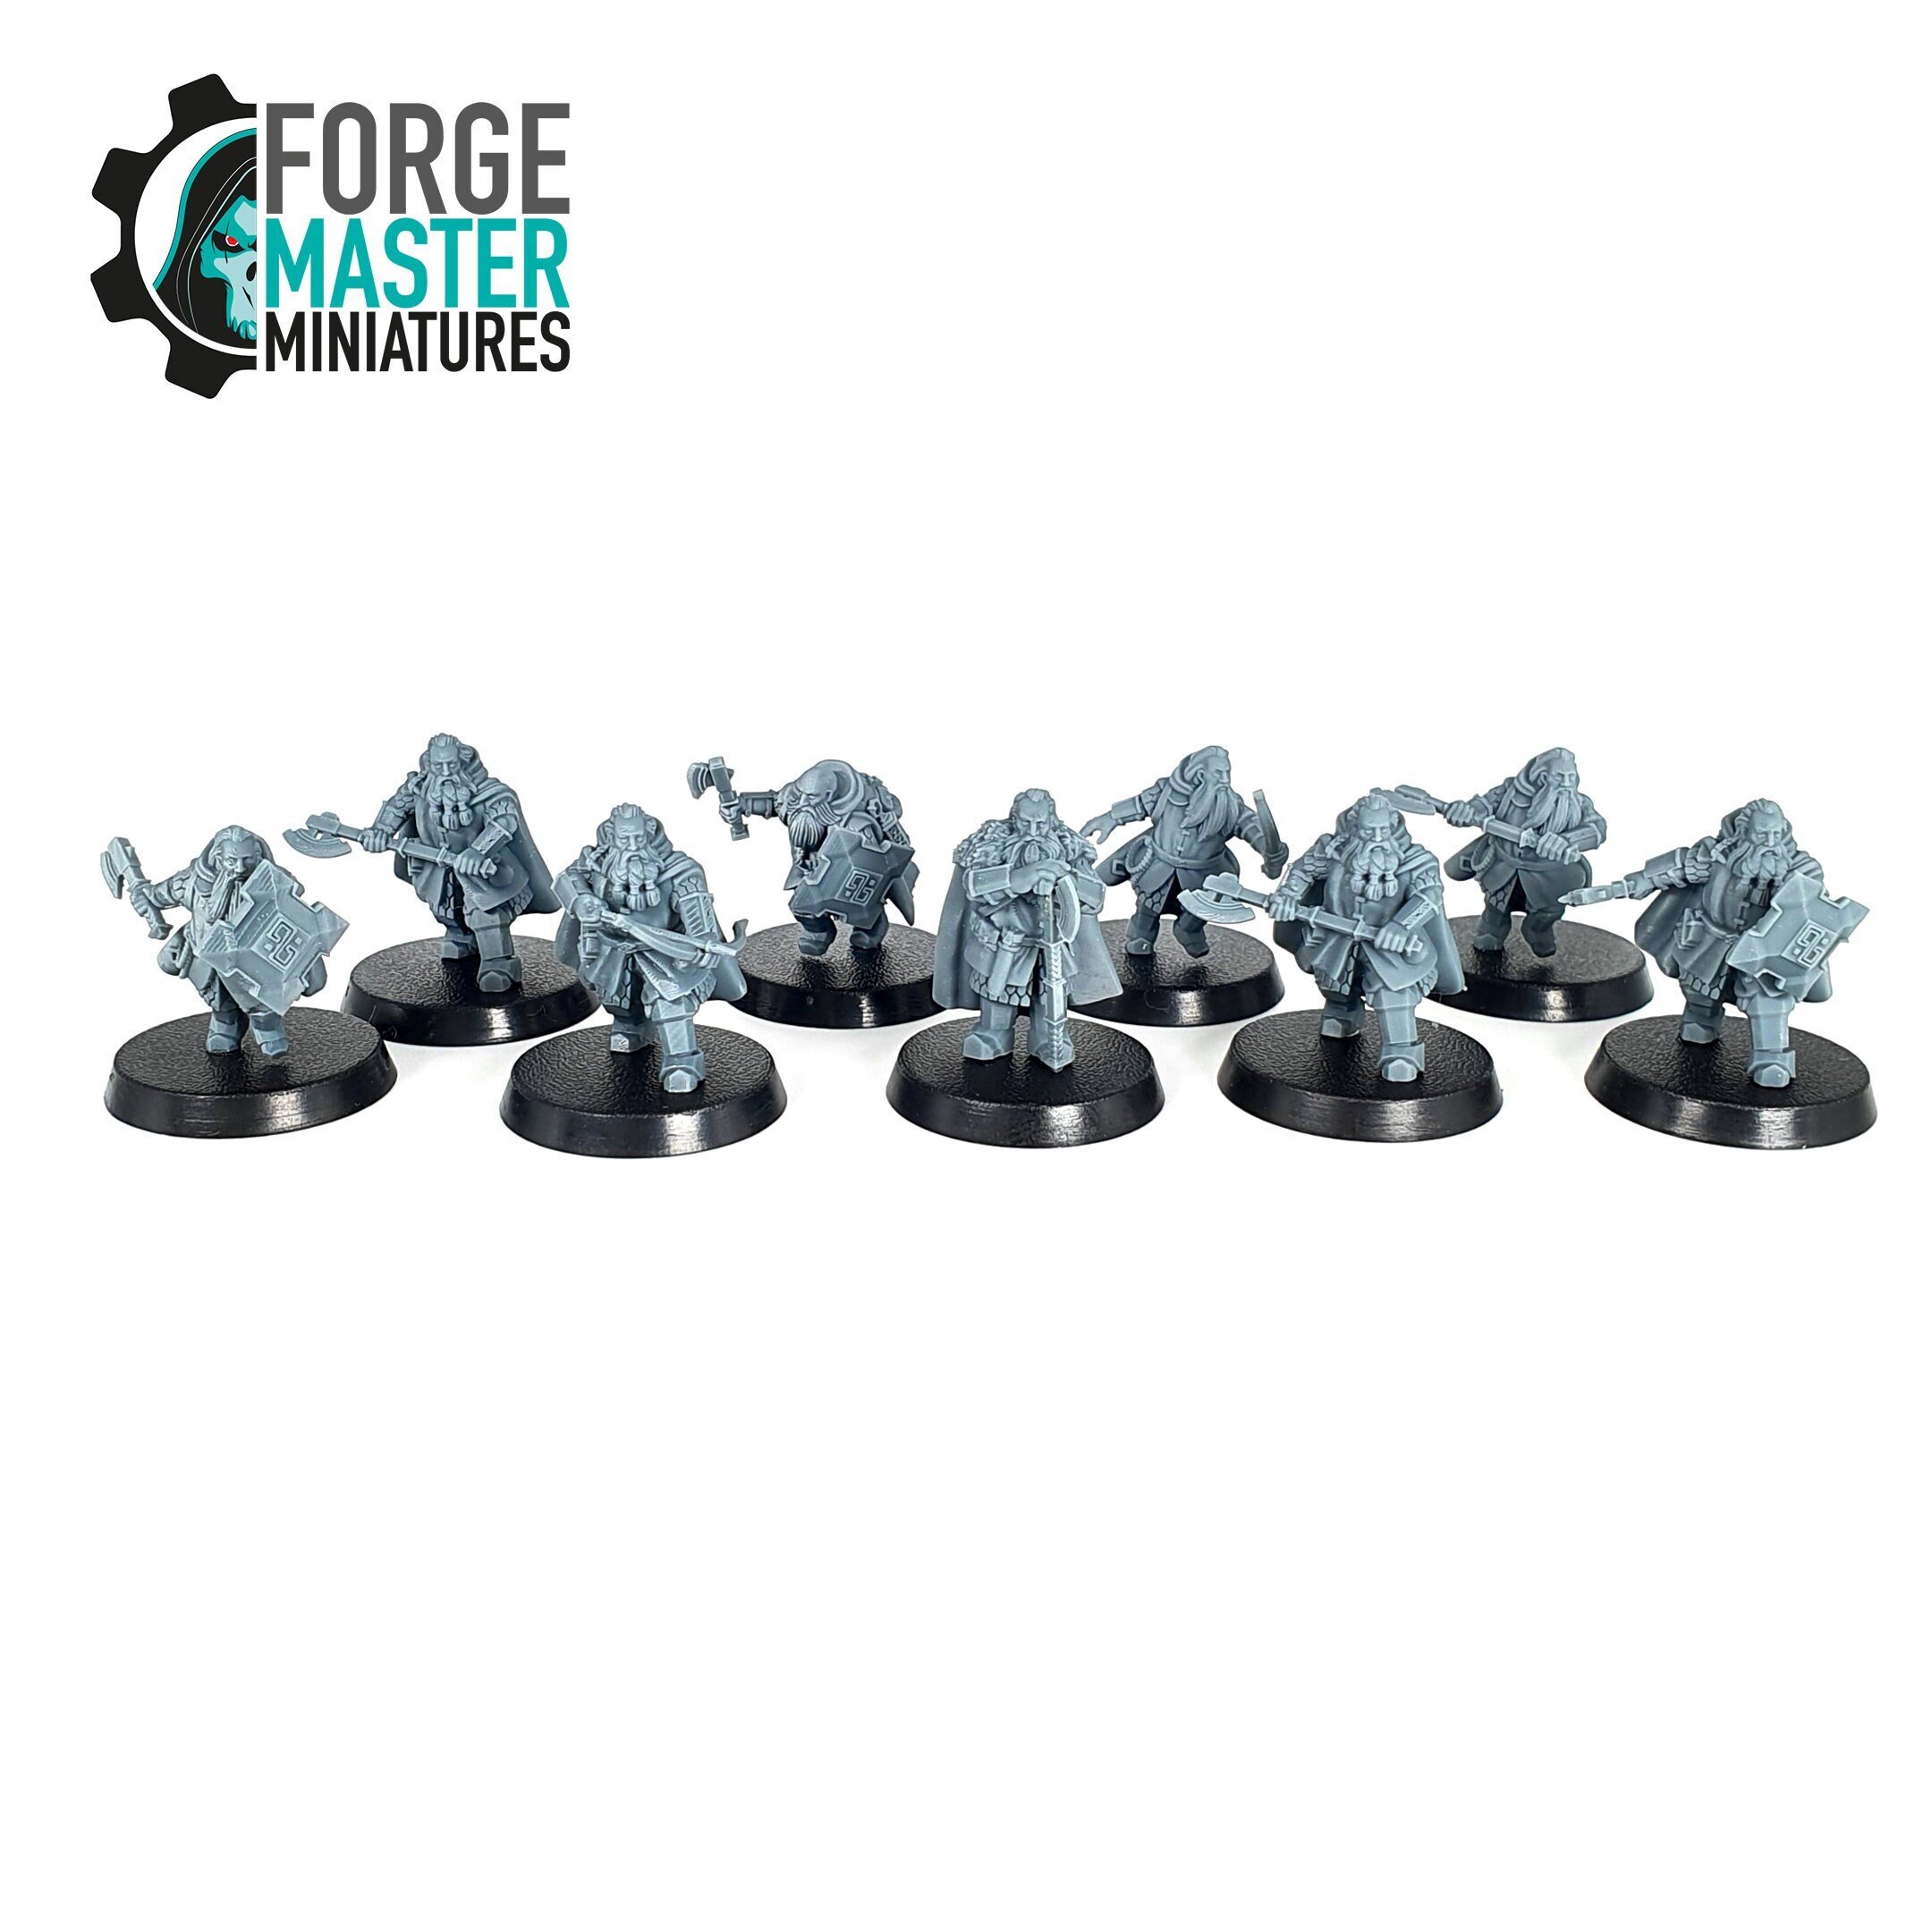 Dwarven Reclaimers Warriors wargaming miniatures by Unreleased Miniatures 3D Printed by Forgemaster Miniatures